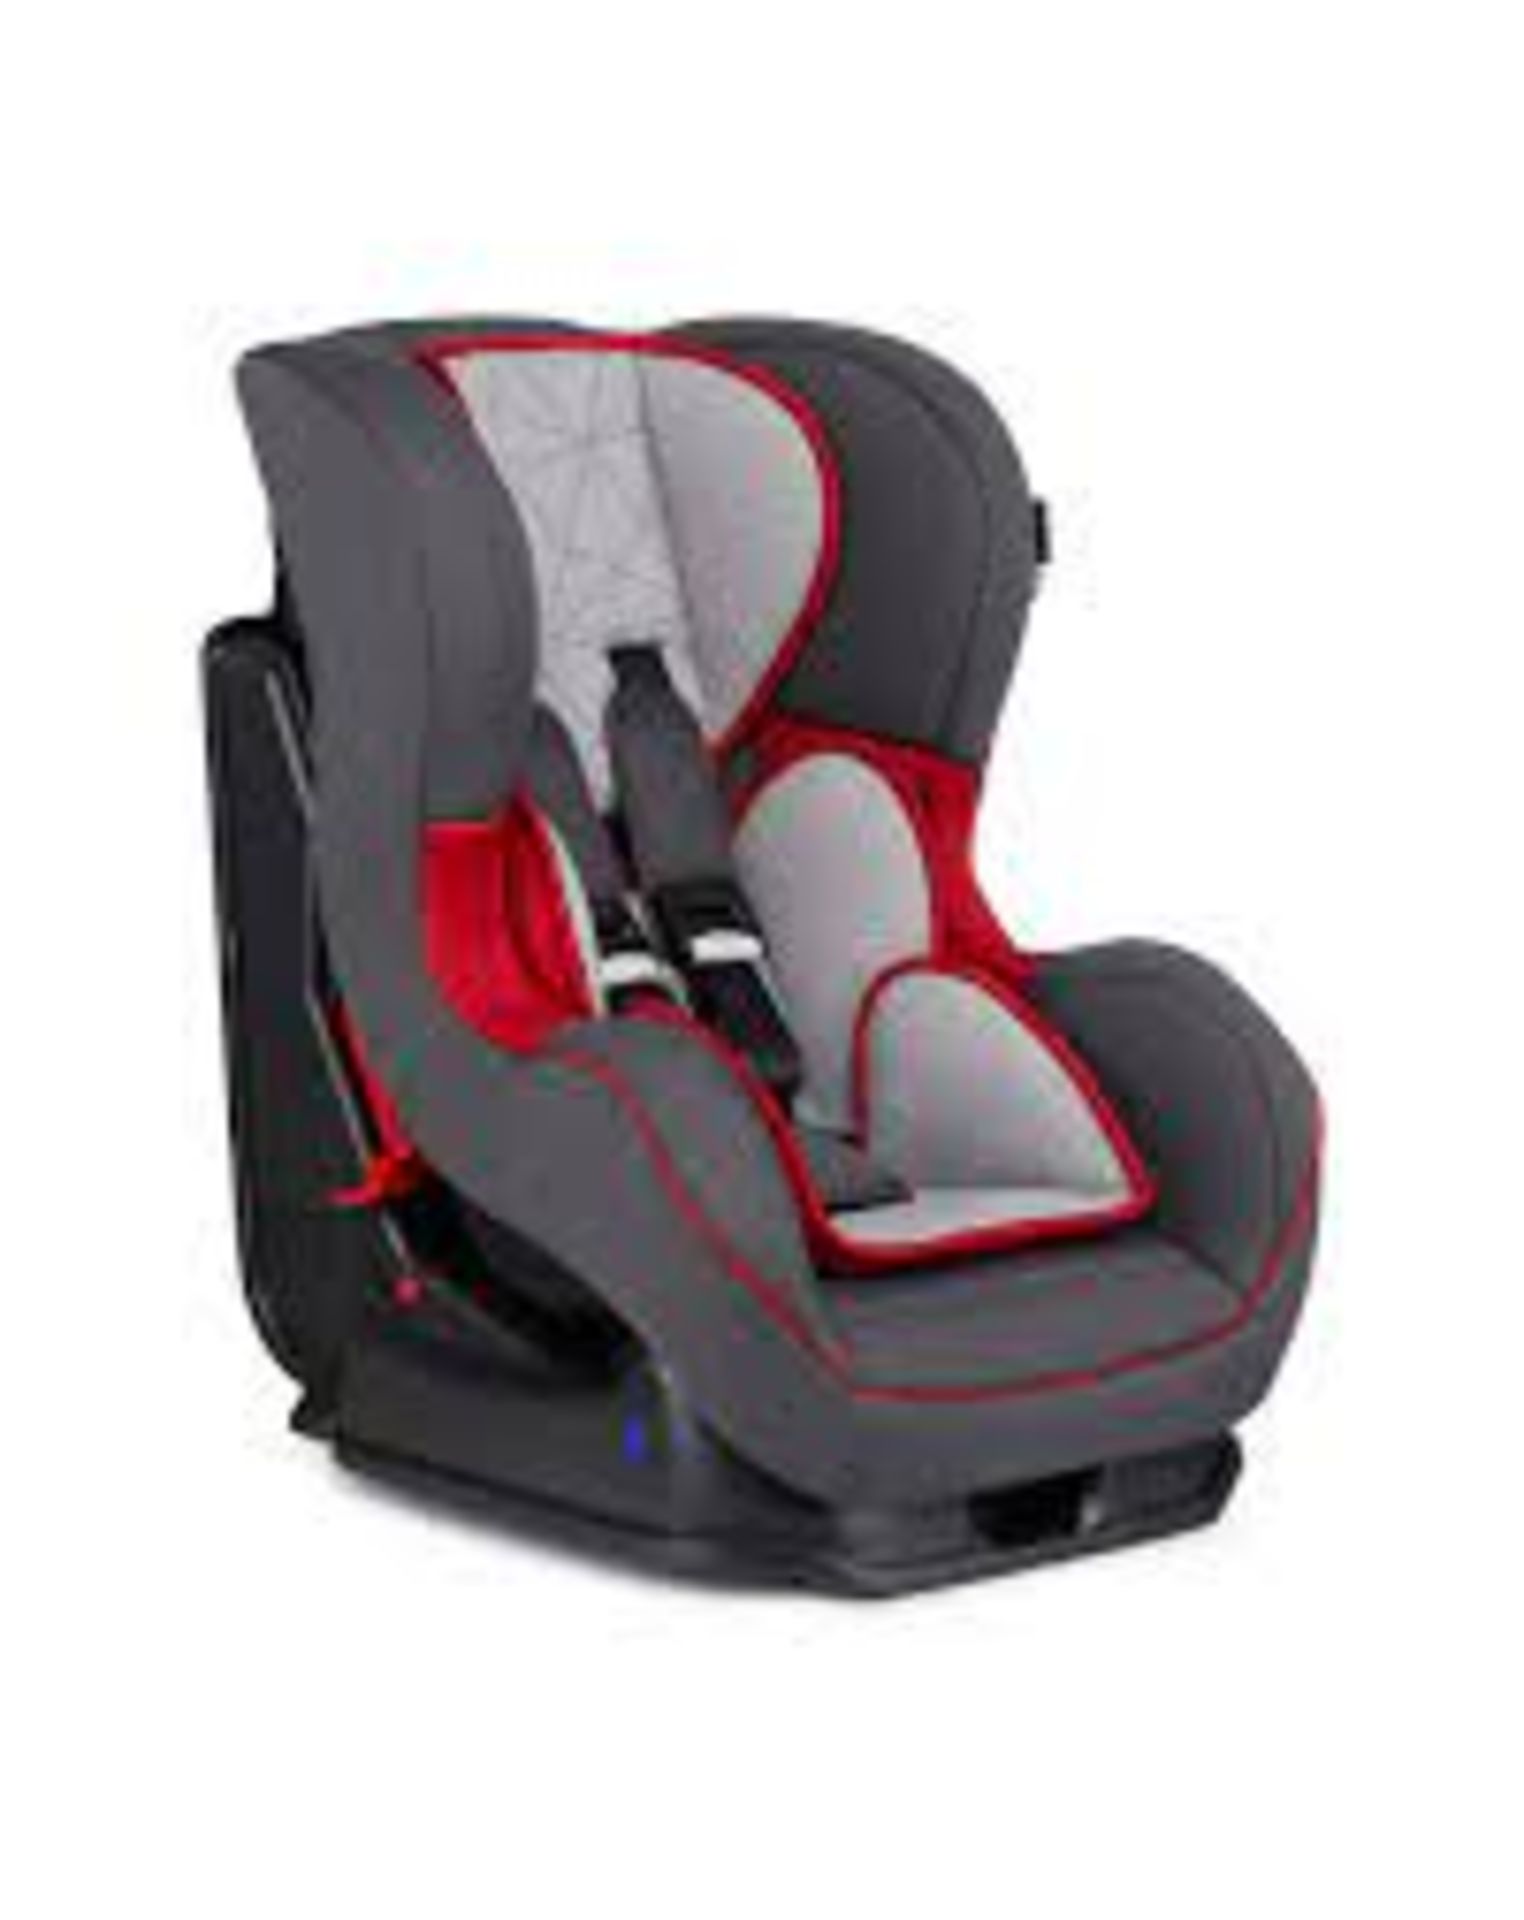 BRAND NEW MOTHERCARE MADRID CAR SEAT GREY AND RED R9